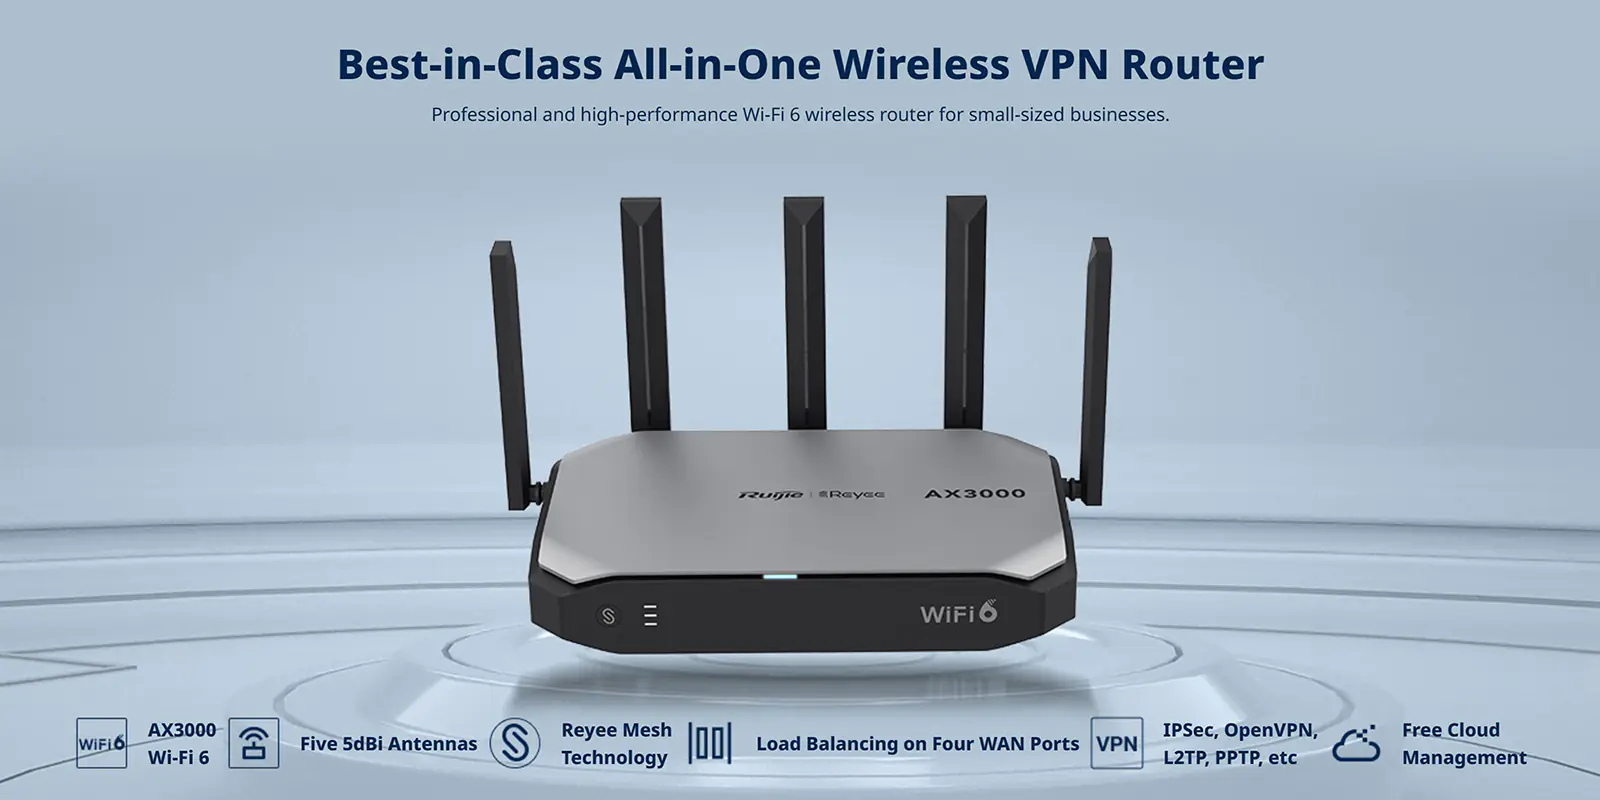 A powerful internet router with five antennas for WiFi 6 connectivity.